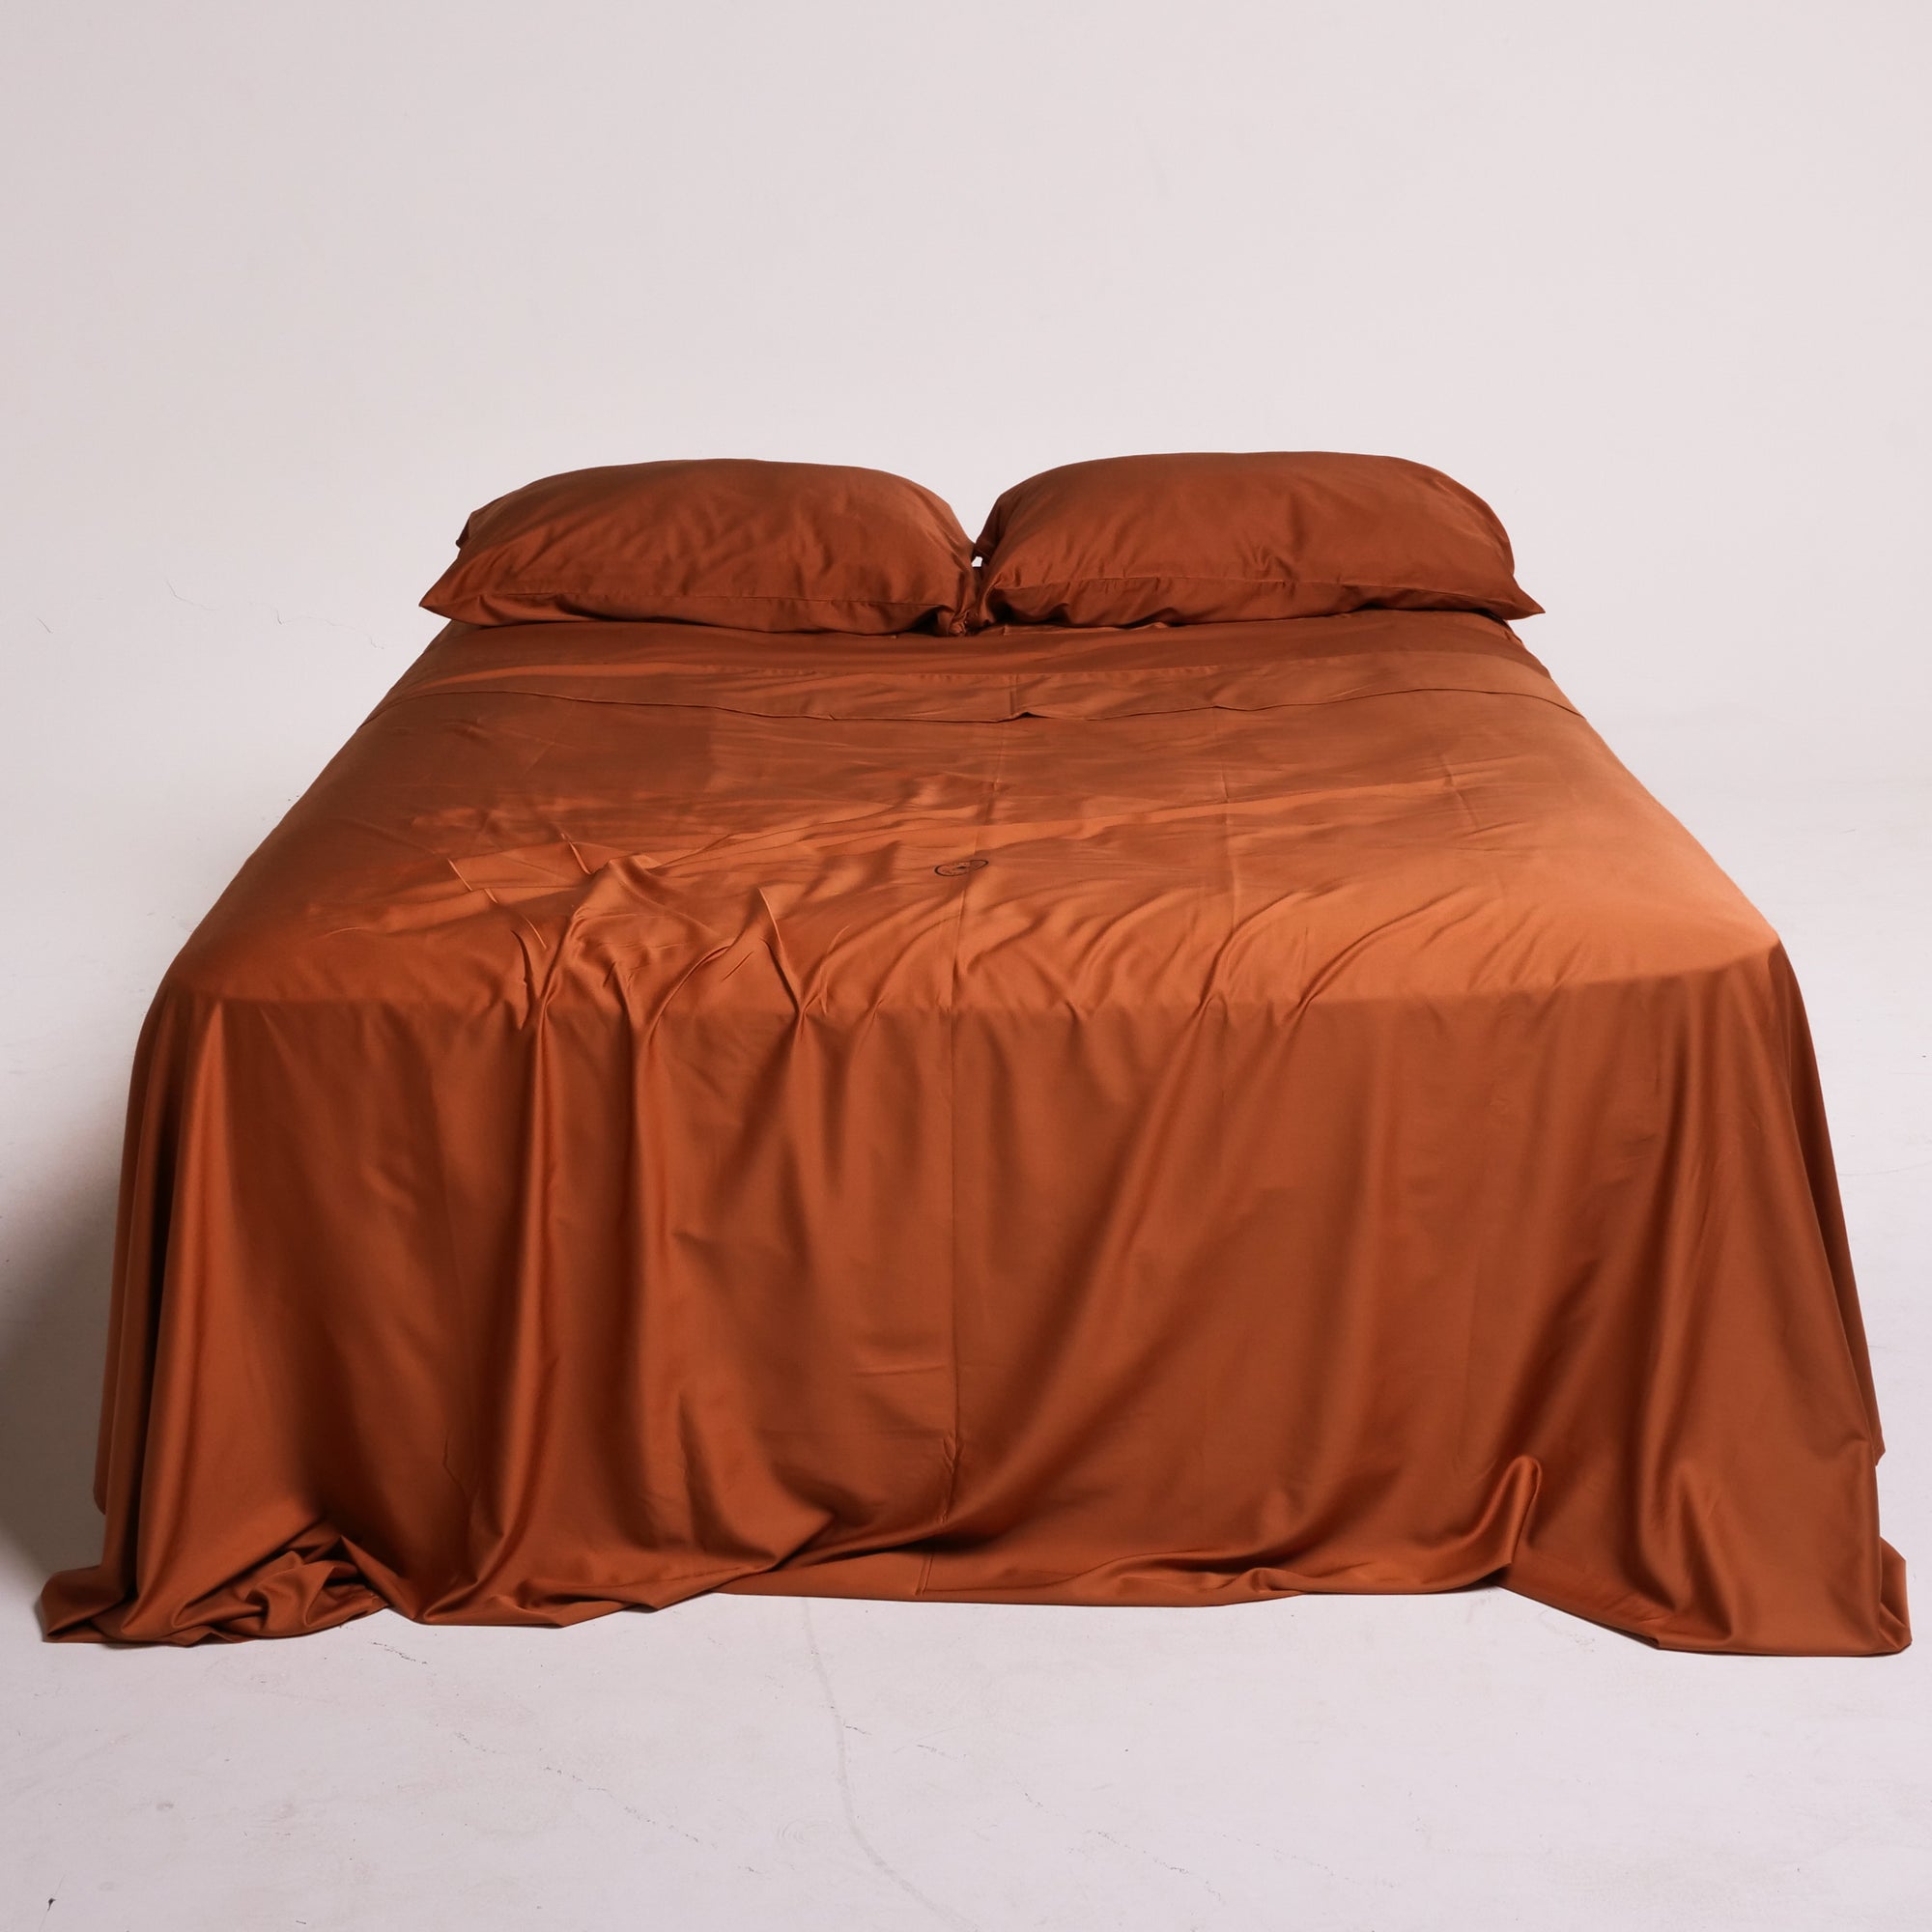 Lad Collective: Sheets that empower men to make their bed